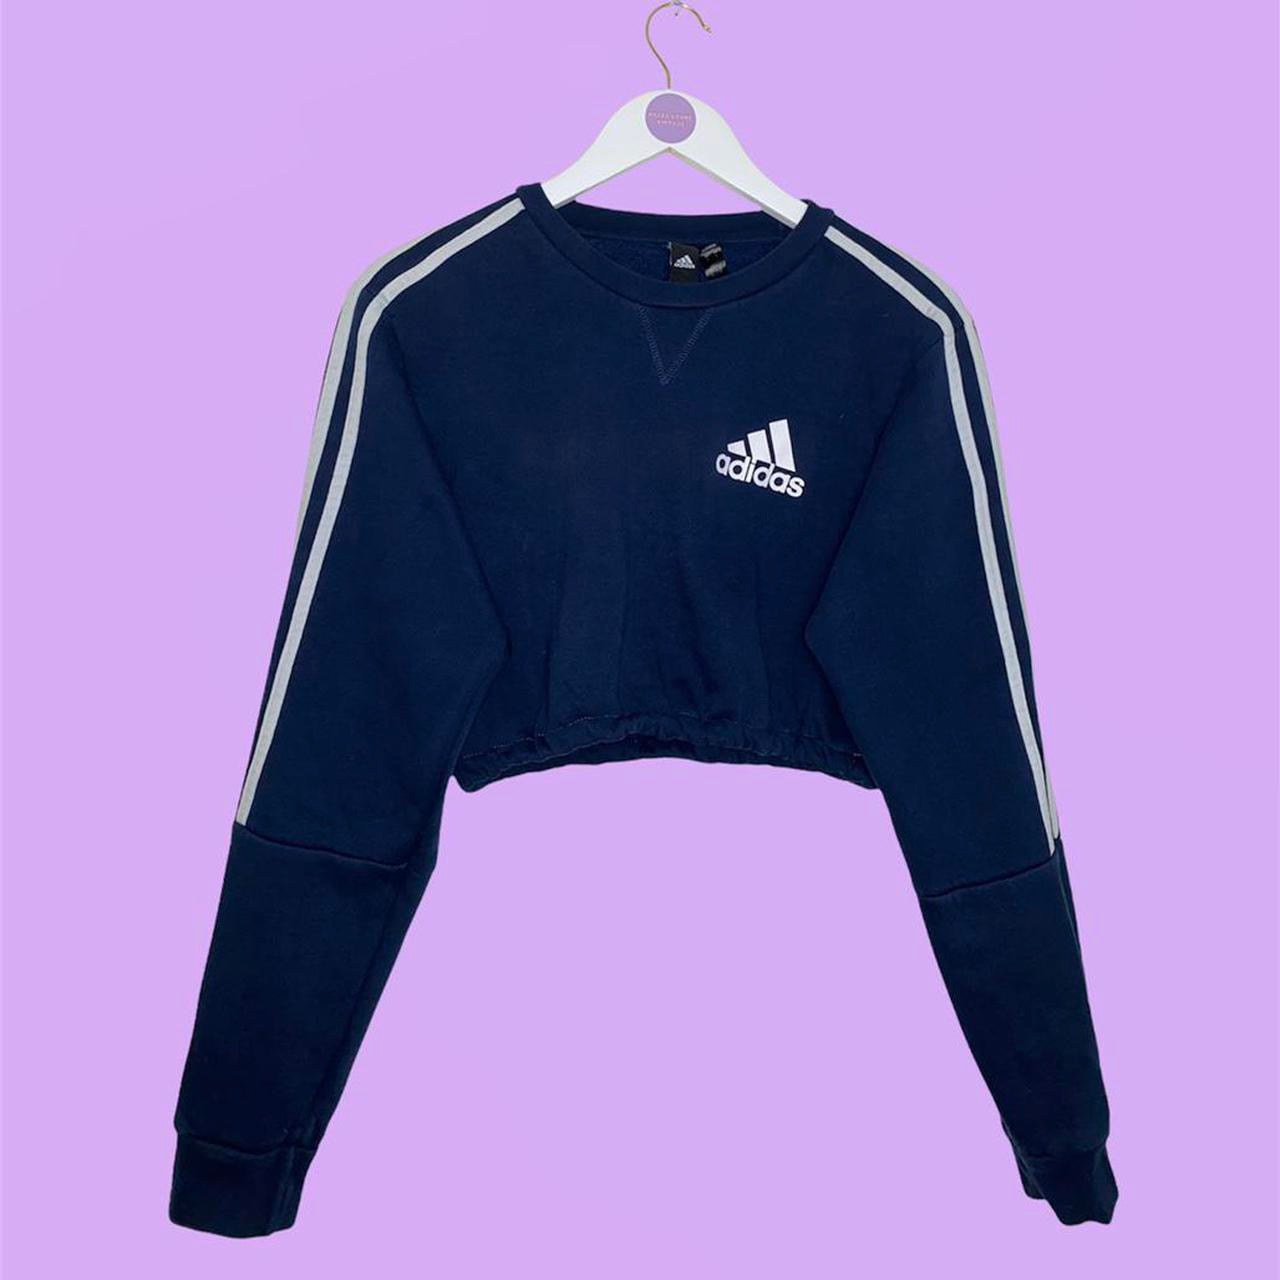 navy sweatshirt with small adidas text and symbol logo on chest with white 3 stripes on arms shown on white clothes hanger on a lilac background